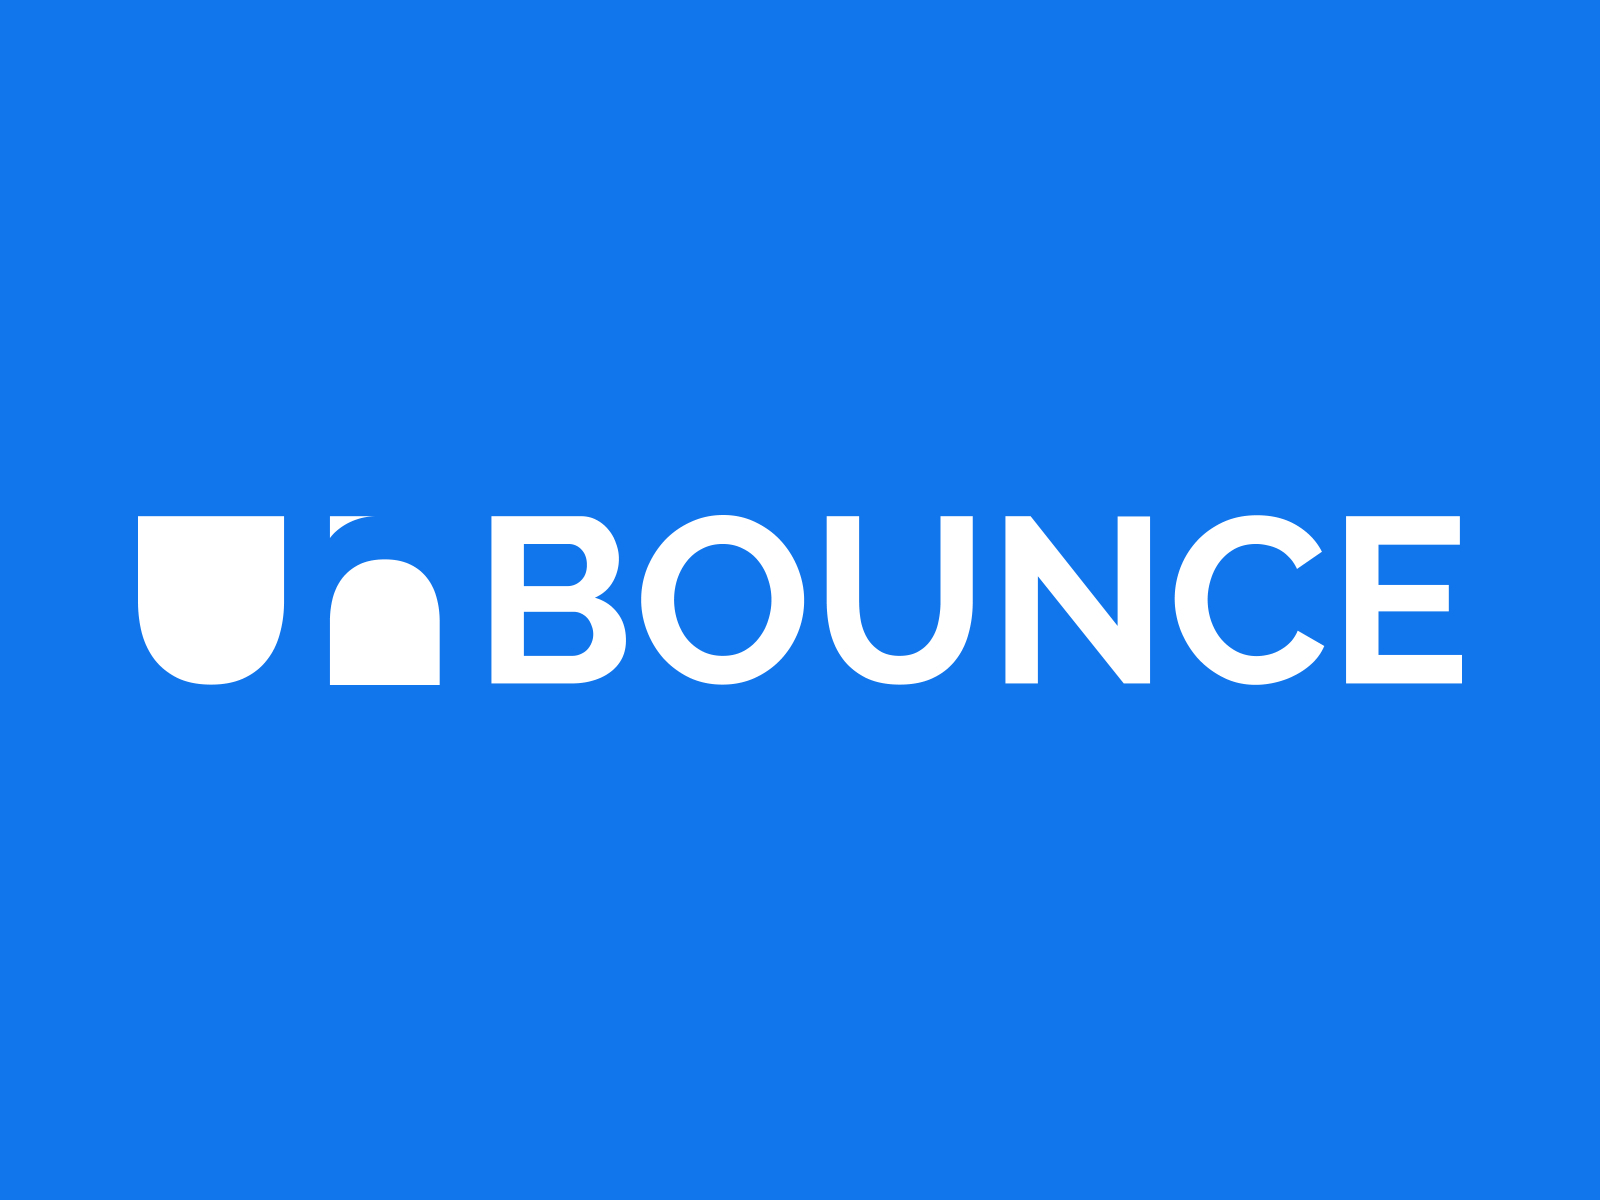 Unbounce Logo Redesign by Tommy Hare on Dribbble